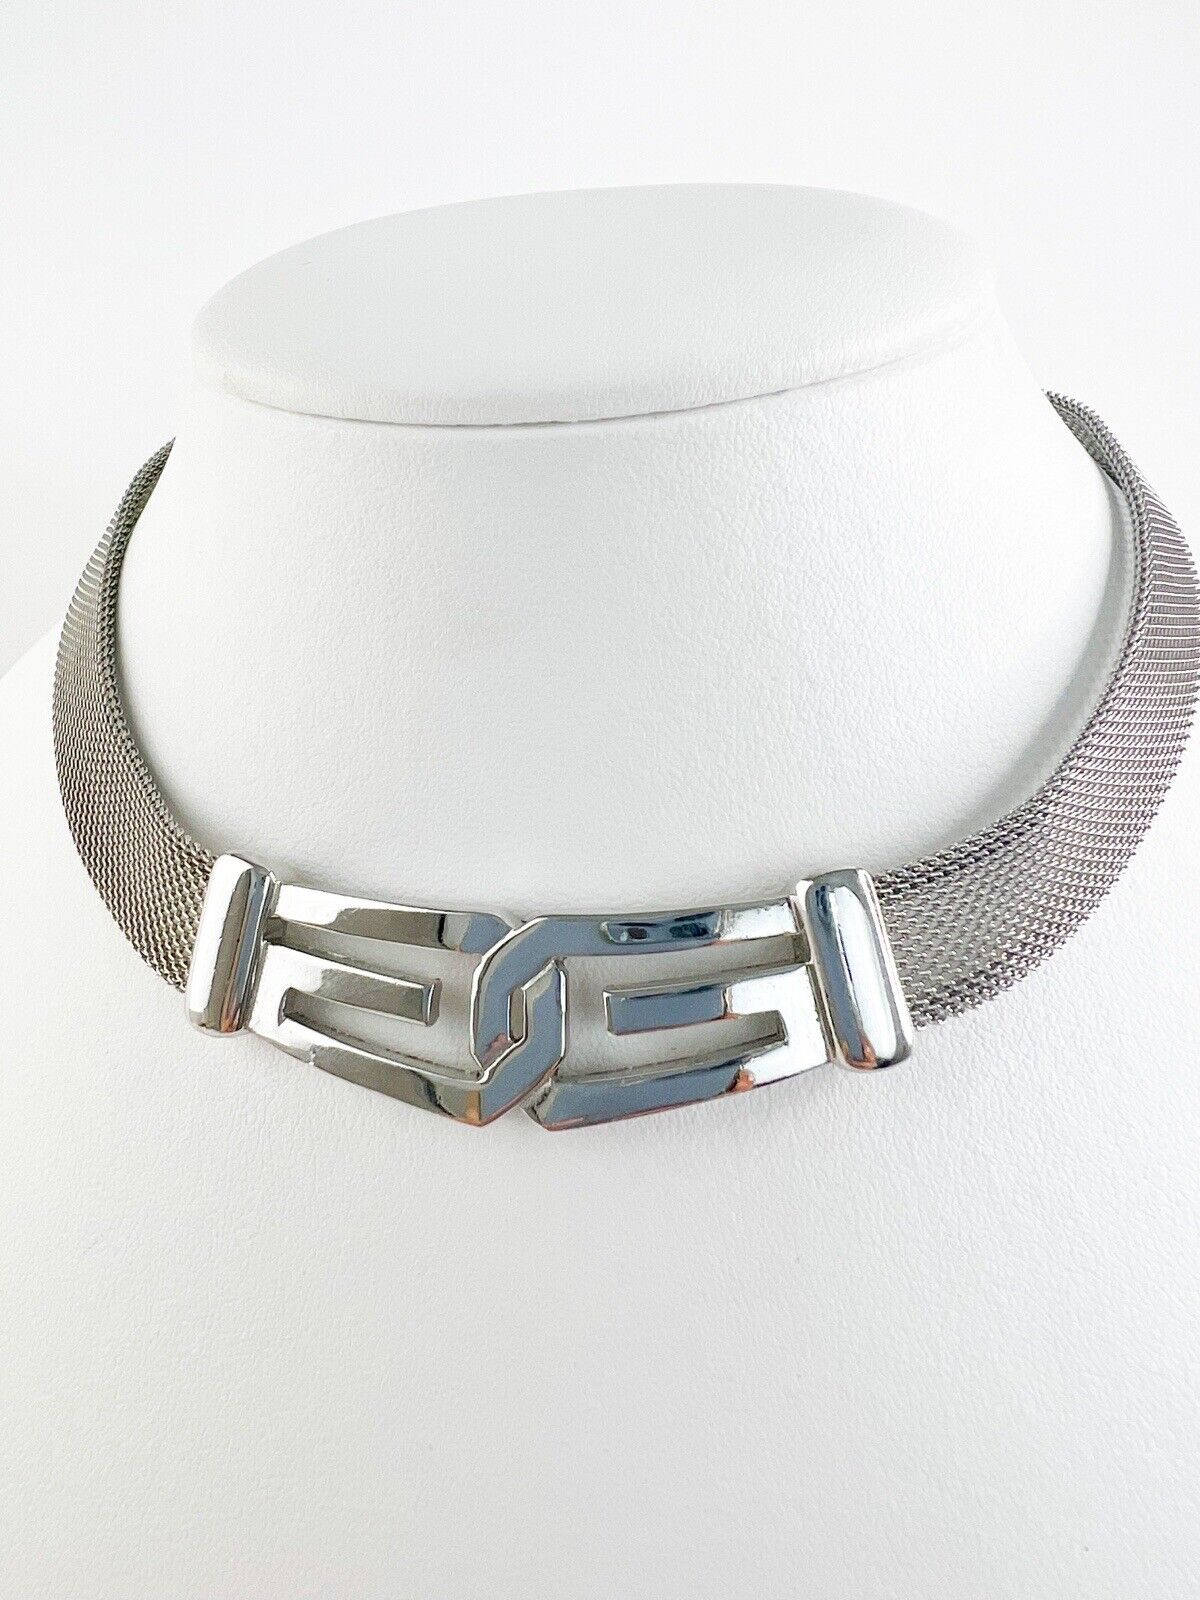 Givenchy Silver Tone 1977 Choker Necklace Vintage Extremely rare collectible